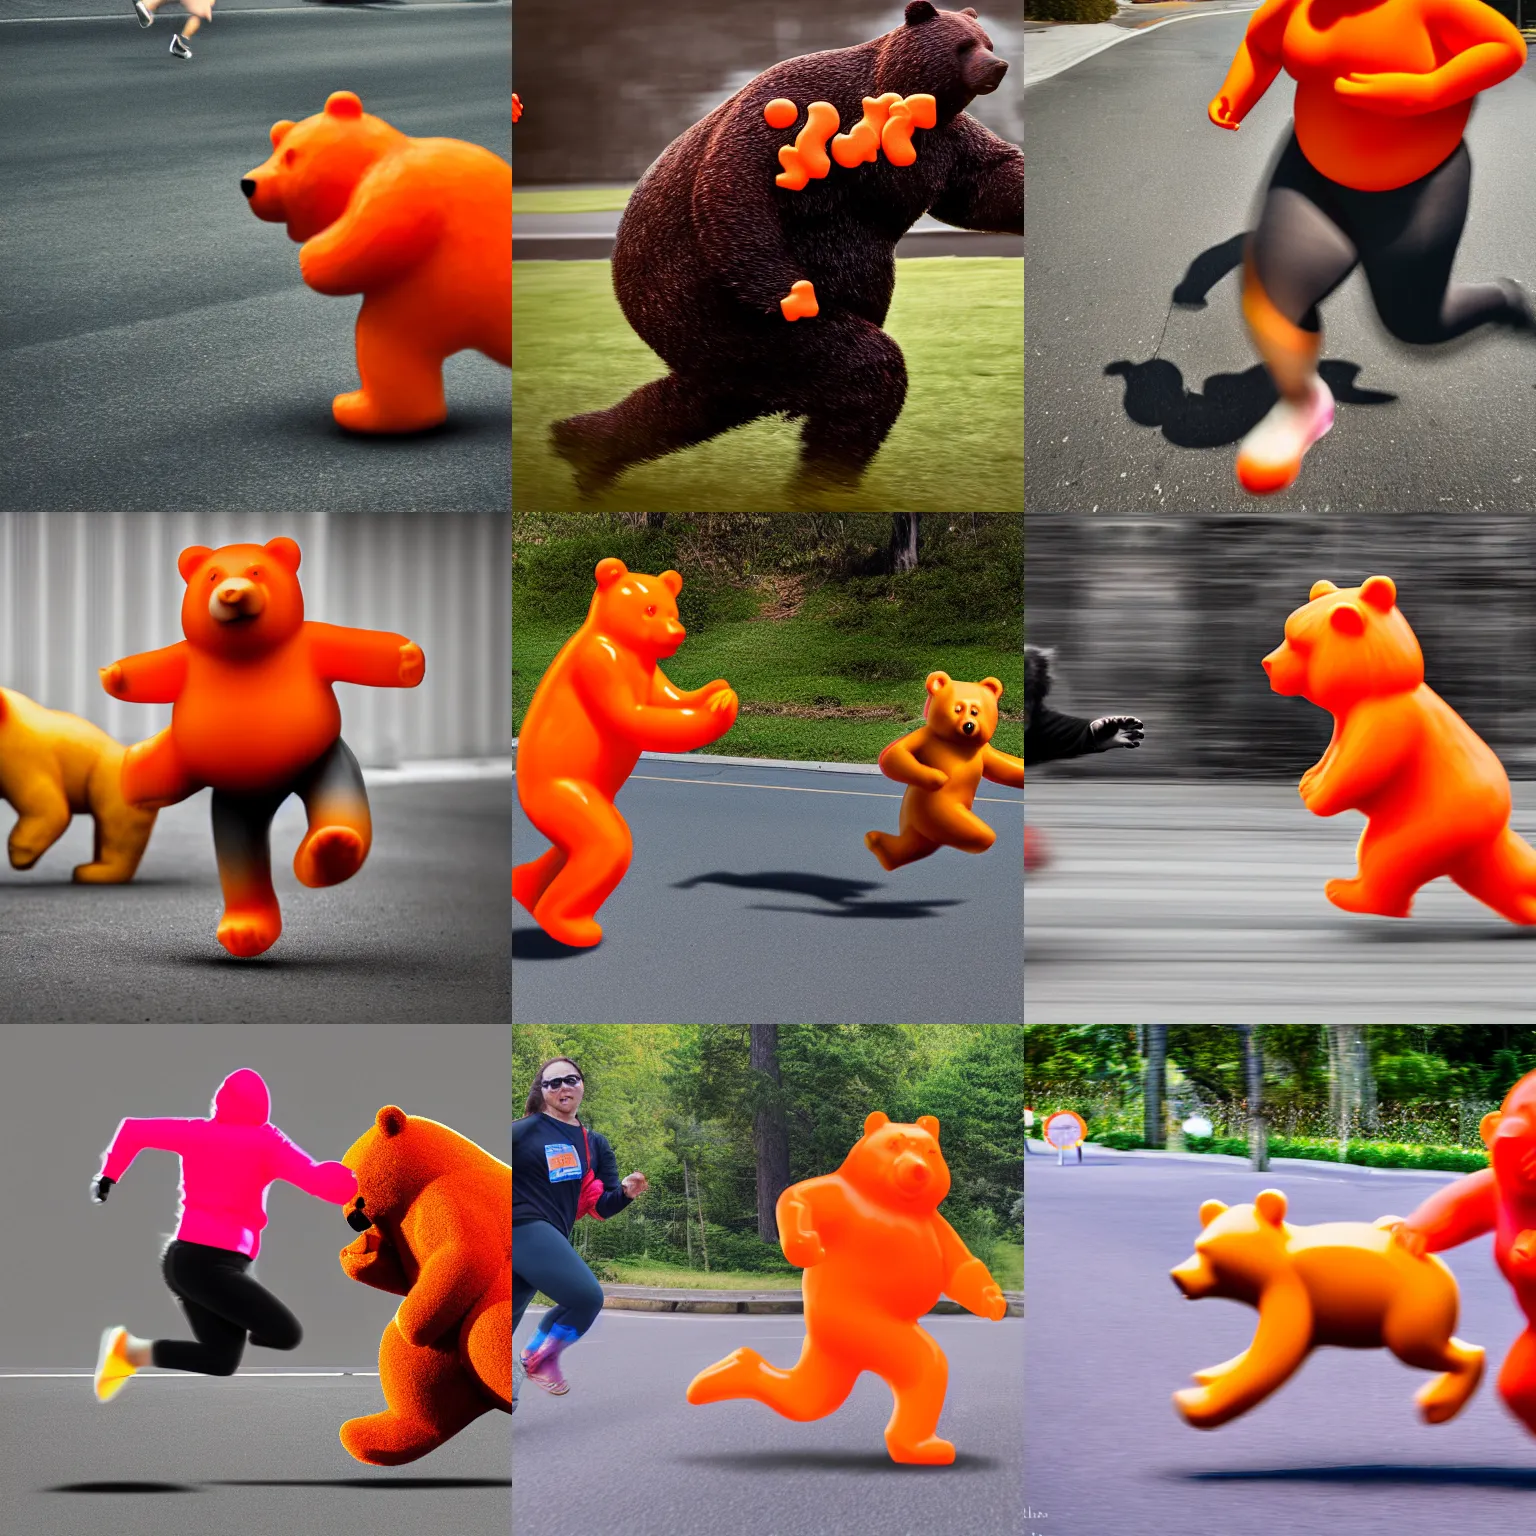 Prompt: a photograph by a canon 5 d, 5 0 mm lens, of a life size gummy bear, orange, running. the gummy bear is being chased by a woman, overweight, she is reaching towards the bear. canon 5 d 5 0 mm lens, action photography, realistic, award winning,